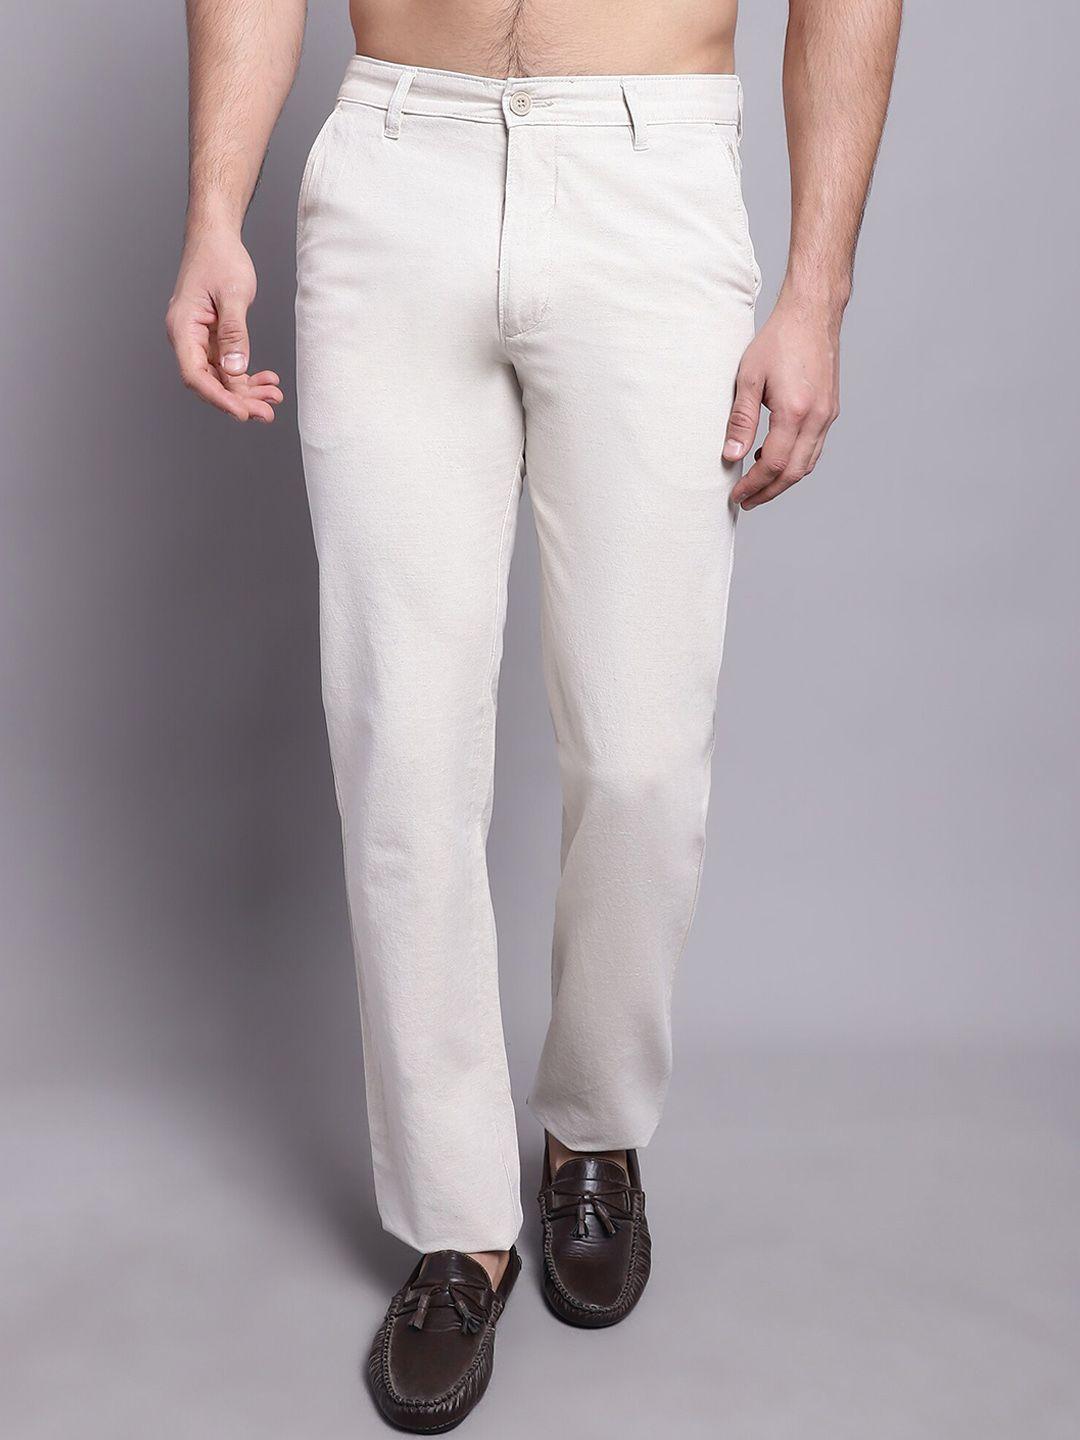 cantabil-men-cream-coloured-comfort-chinos-trousers